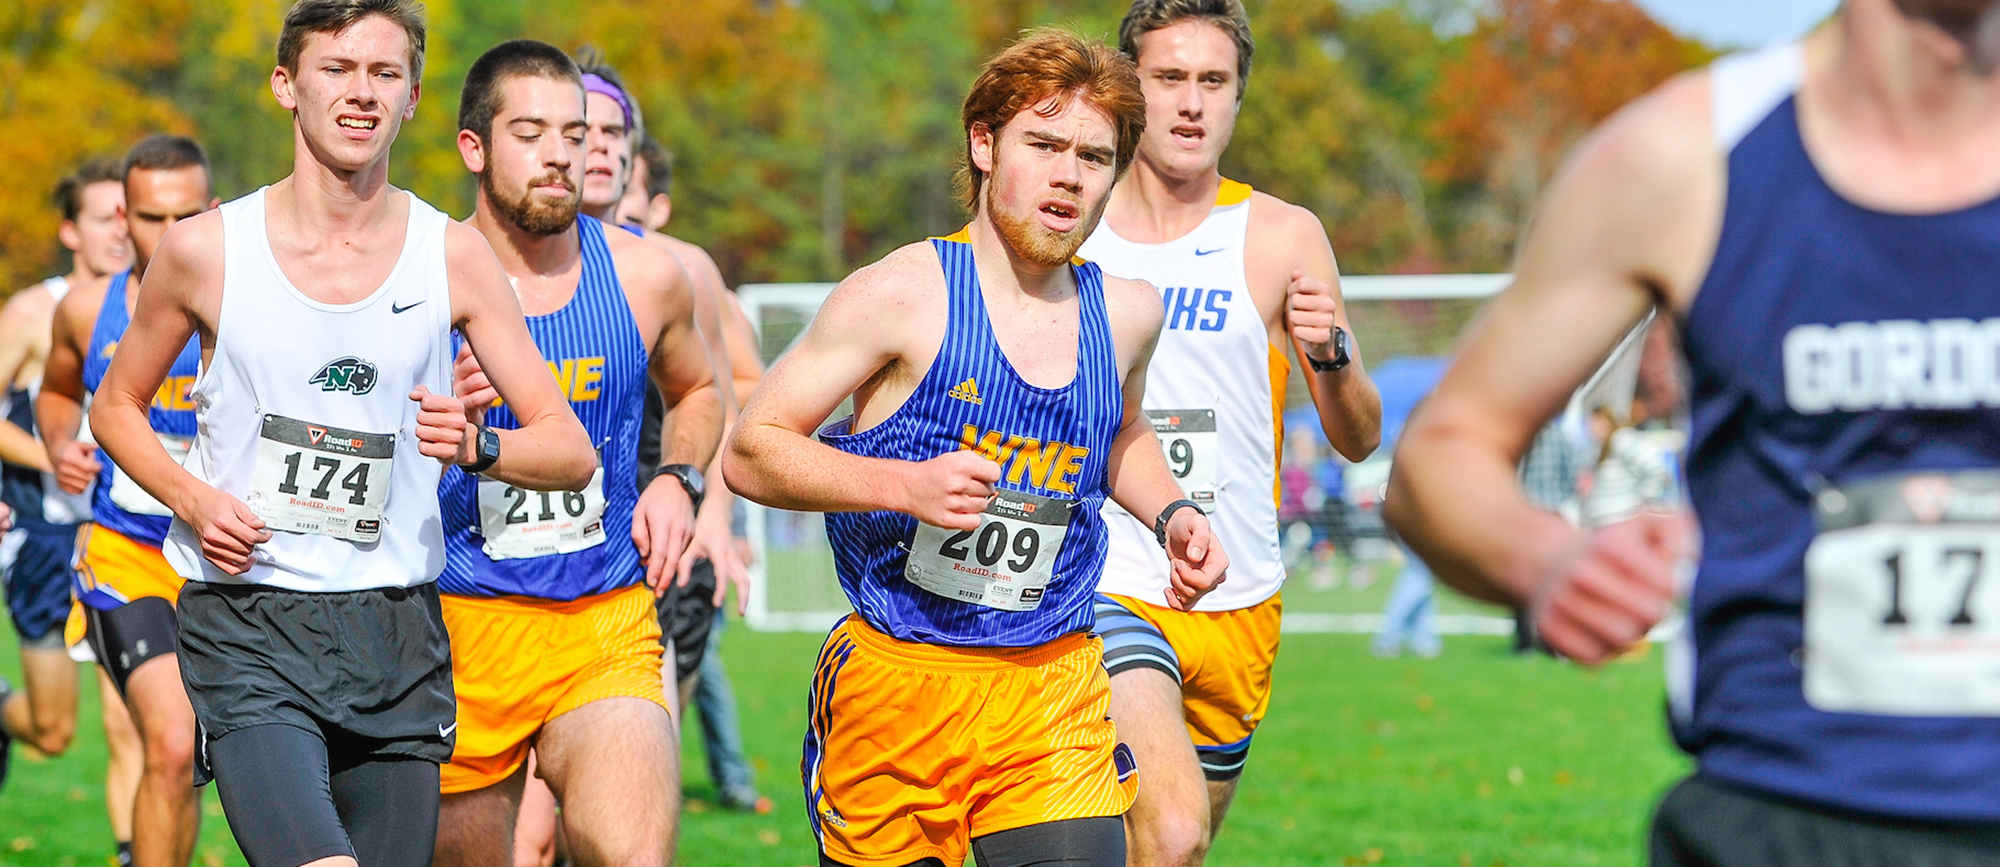 Senior Tim Caves placed 71st with a time of 21:05.6 on Saturday at the Smith Invitational.